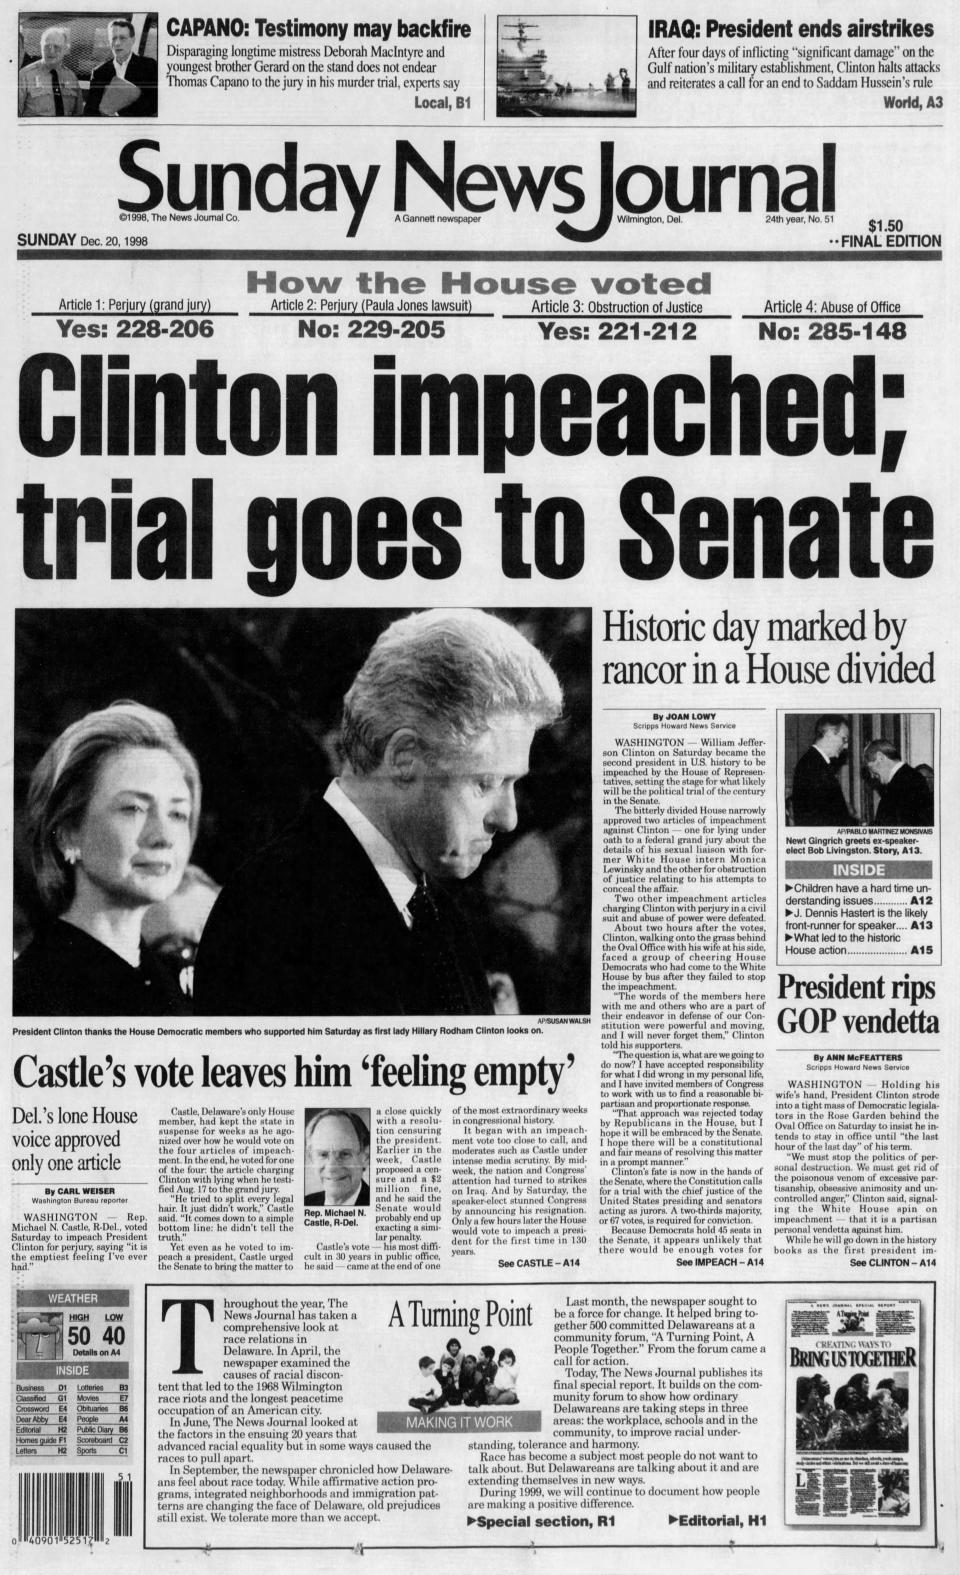 Front page of the Sunday News Journal from Dec. 20, 1998.